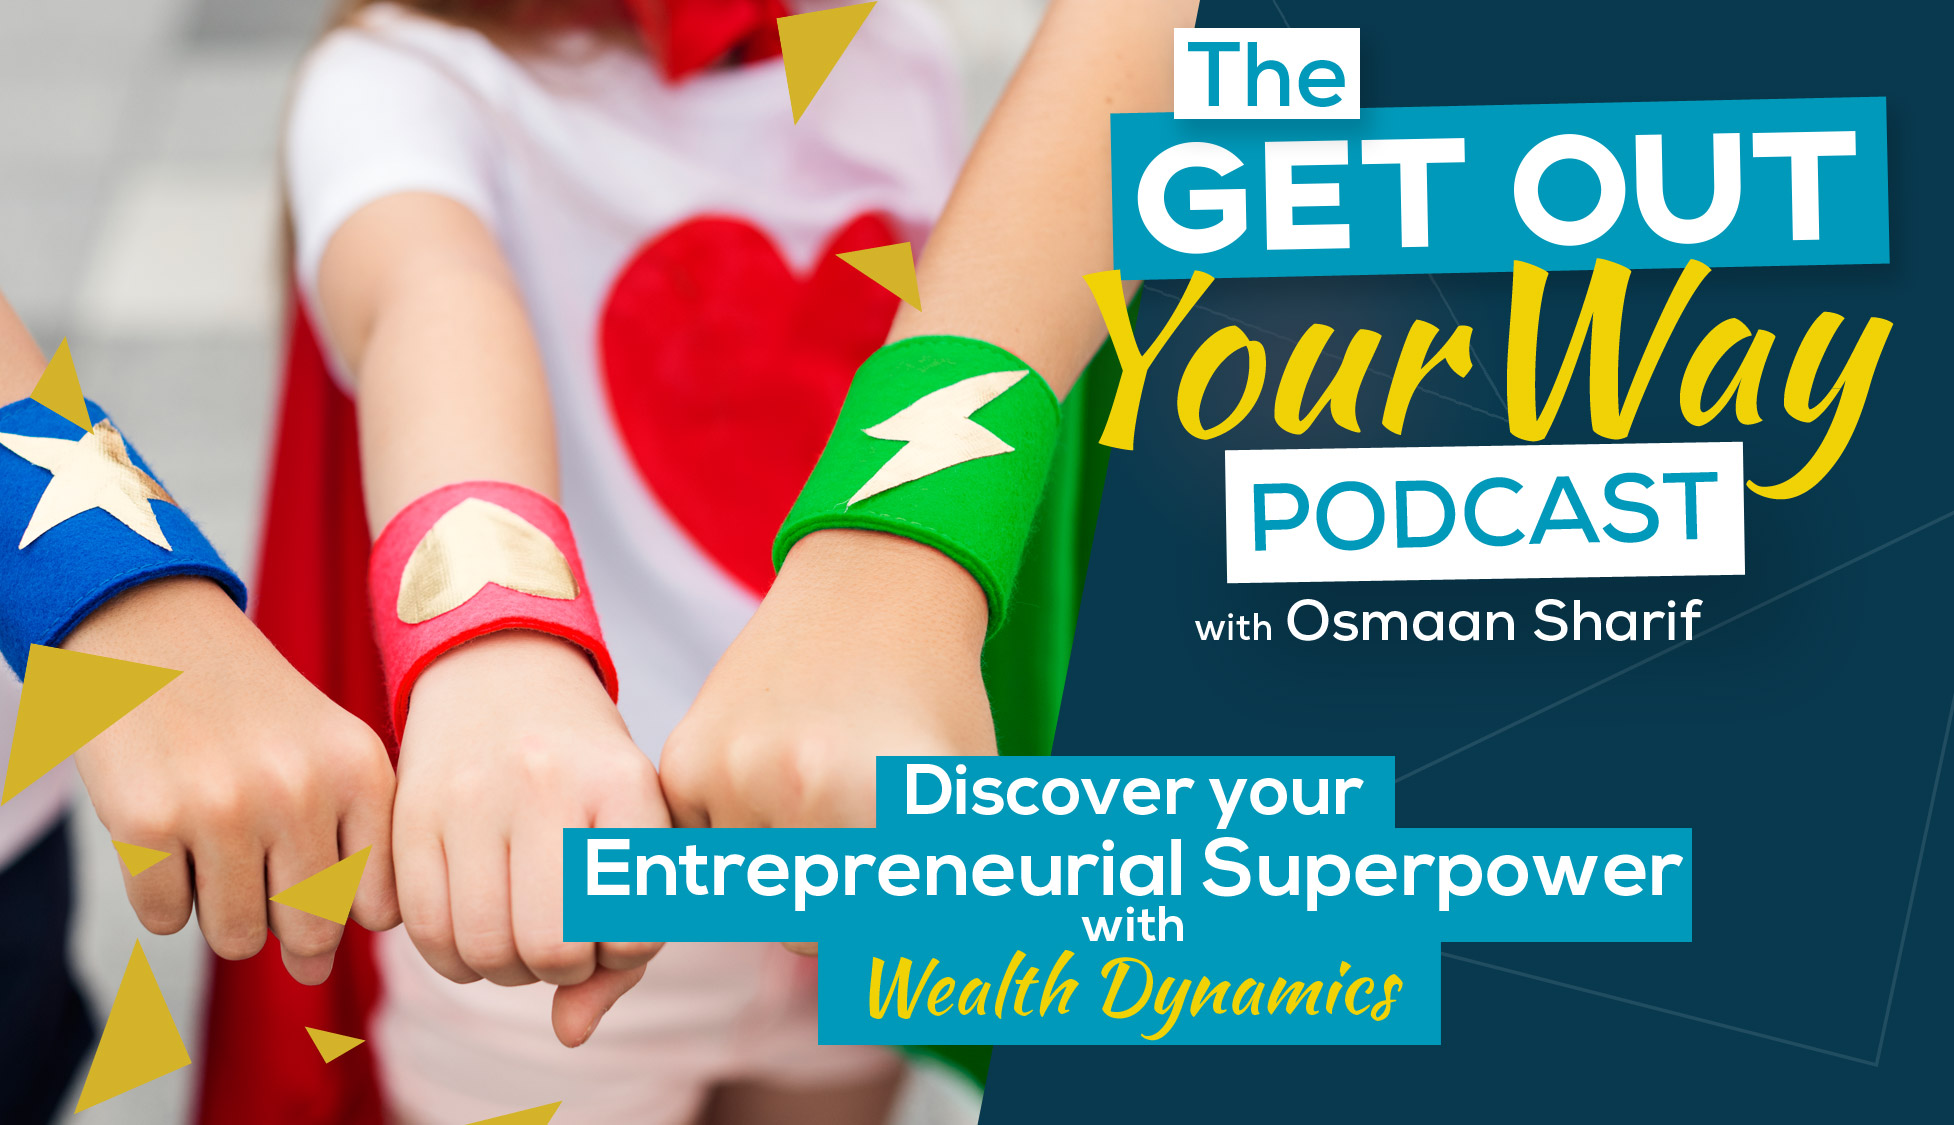 Discover your Entrepreneurial Superpower with Wealth Dynamics